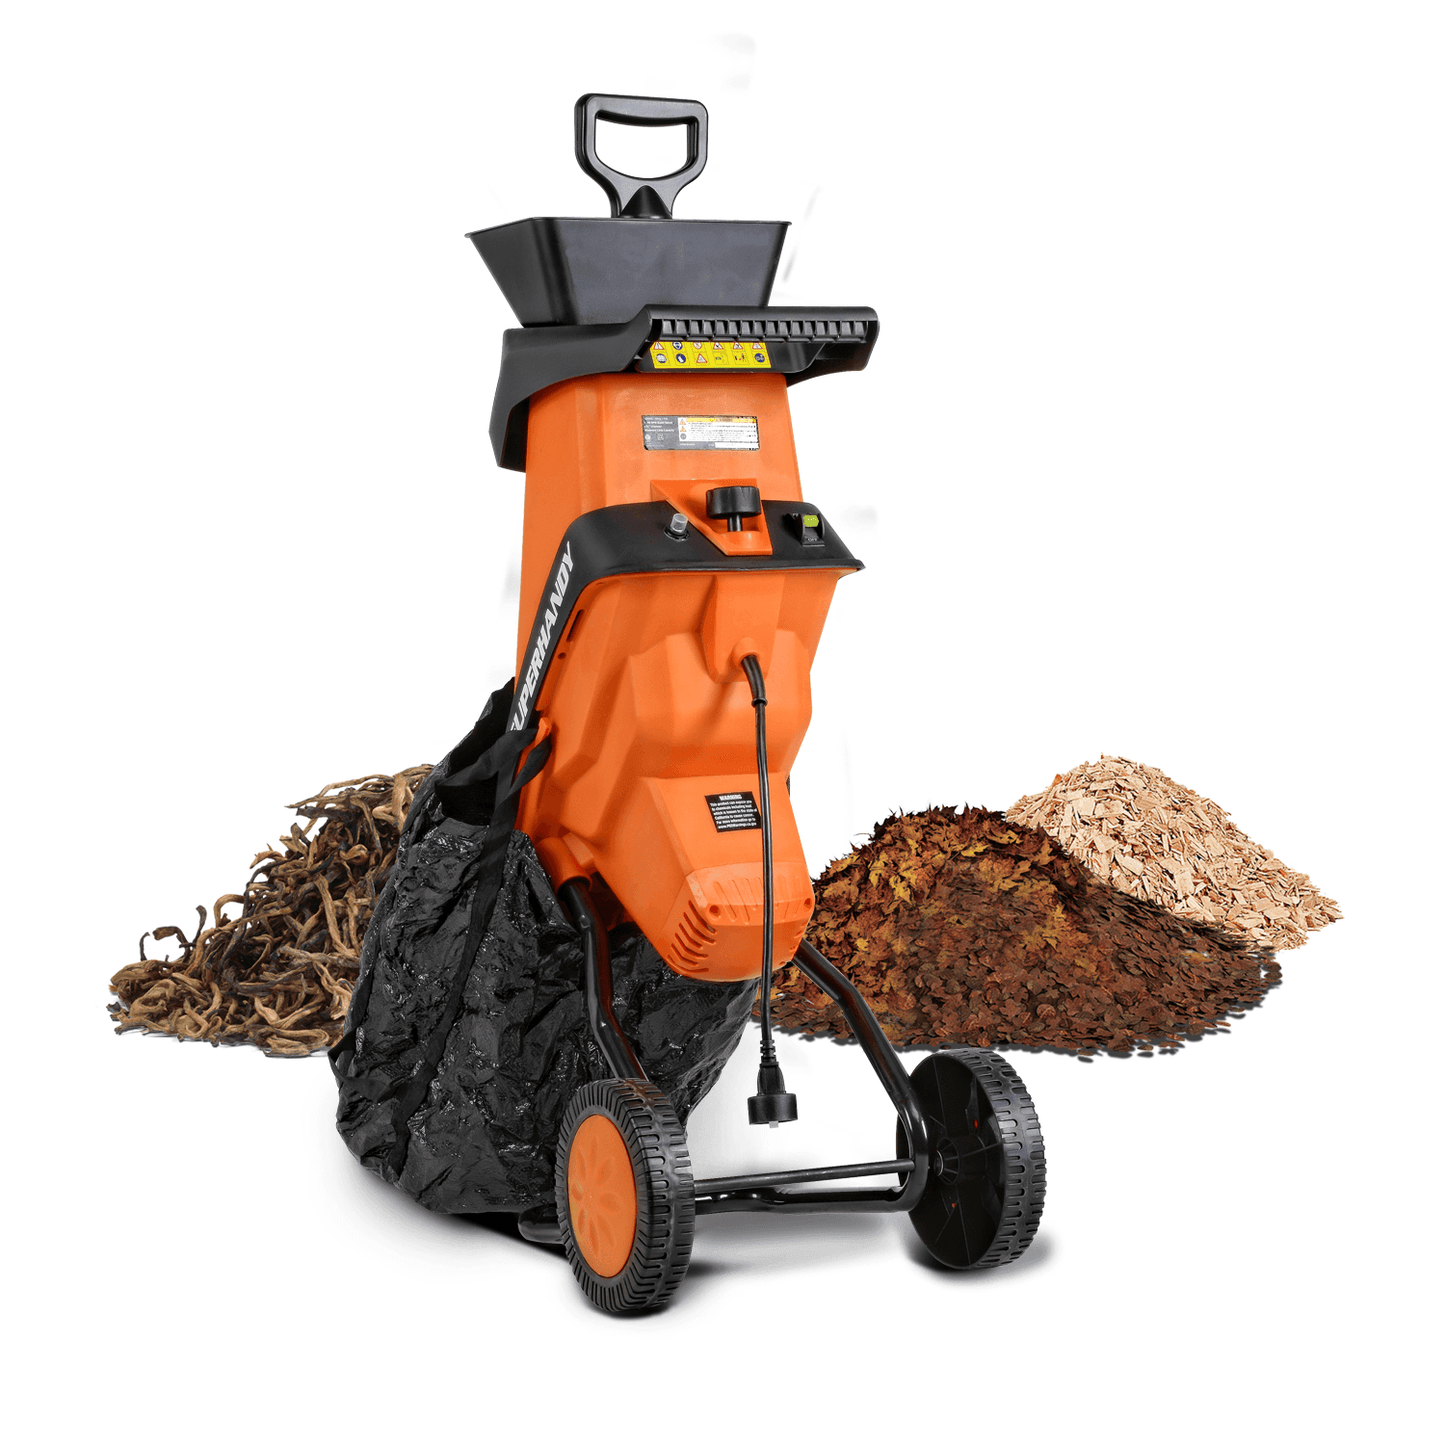 SuperHandy Light Duty Electric Wood Chipper - For Small Branches, Leaves, and Debris (Orange) Wood Chipper